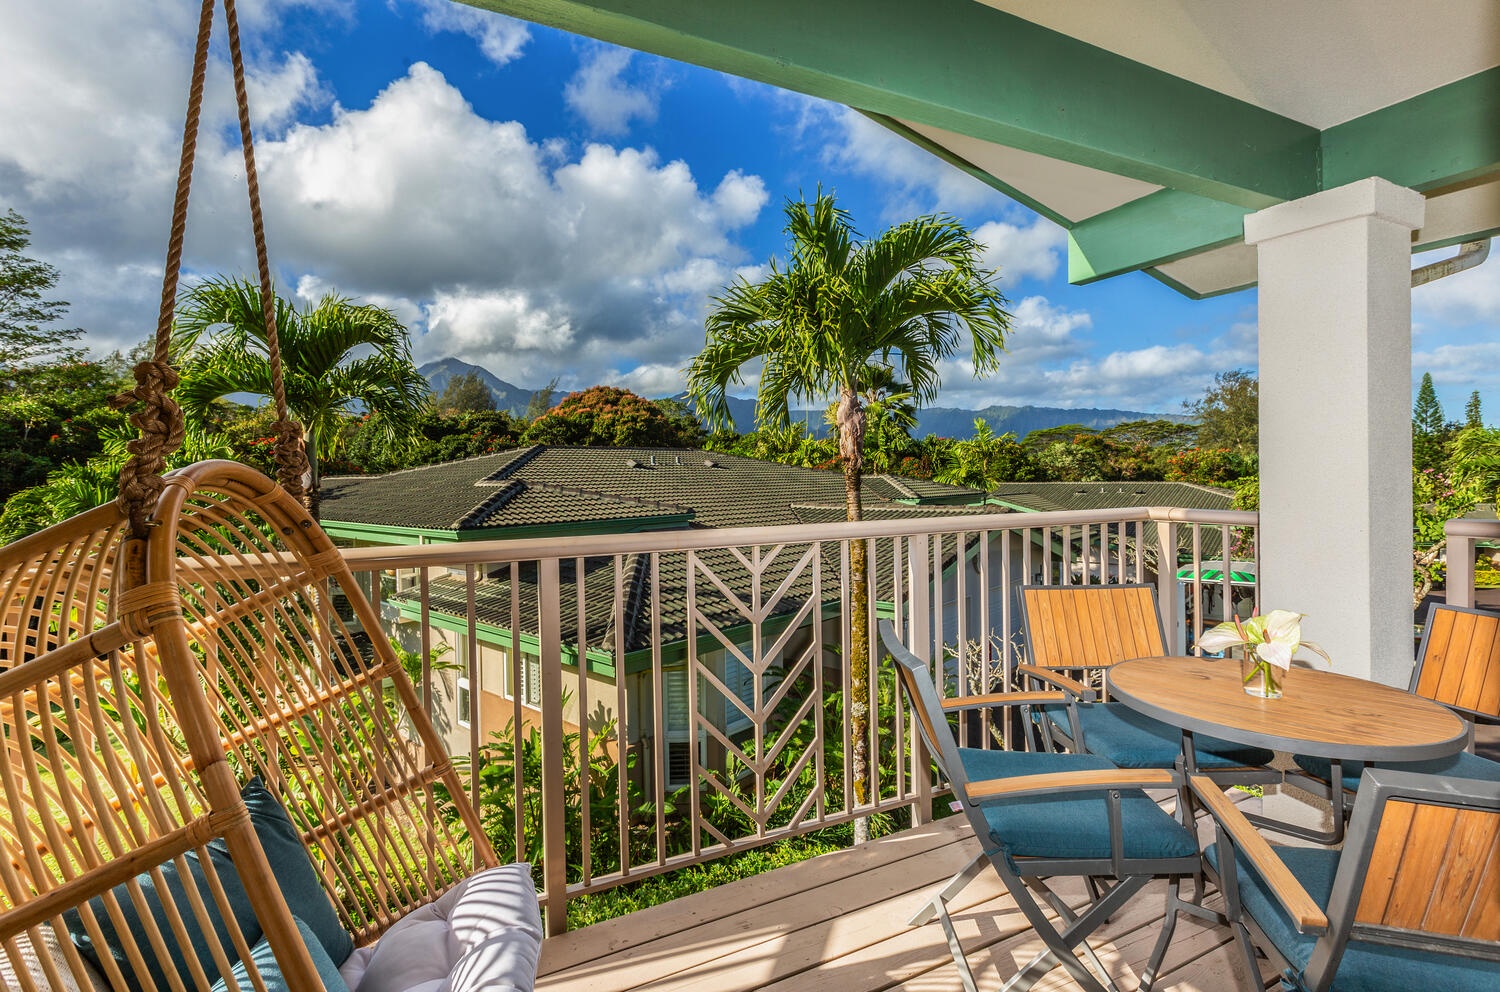 Princeville Vacation Rentals, Sea Glass - A relaxed morning in front of the scenic mountain view from the lanai, a perfect spot for a morning coffee.